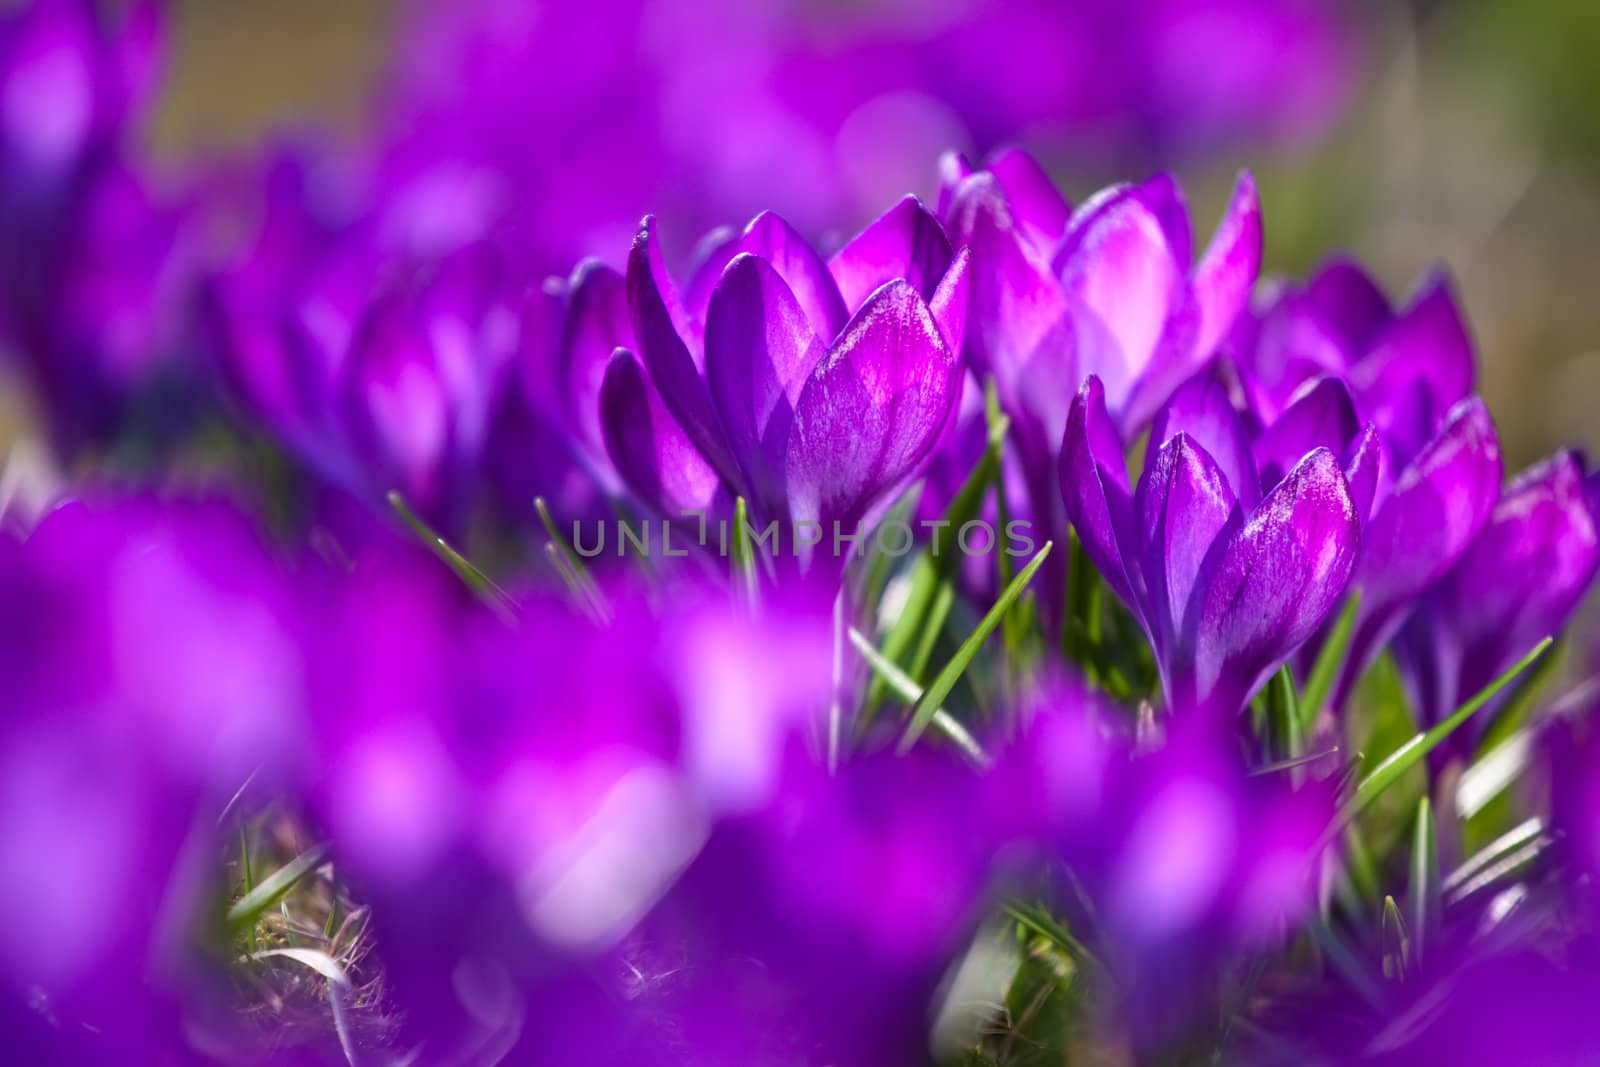 Bunch of violet crocuses in the grass